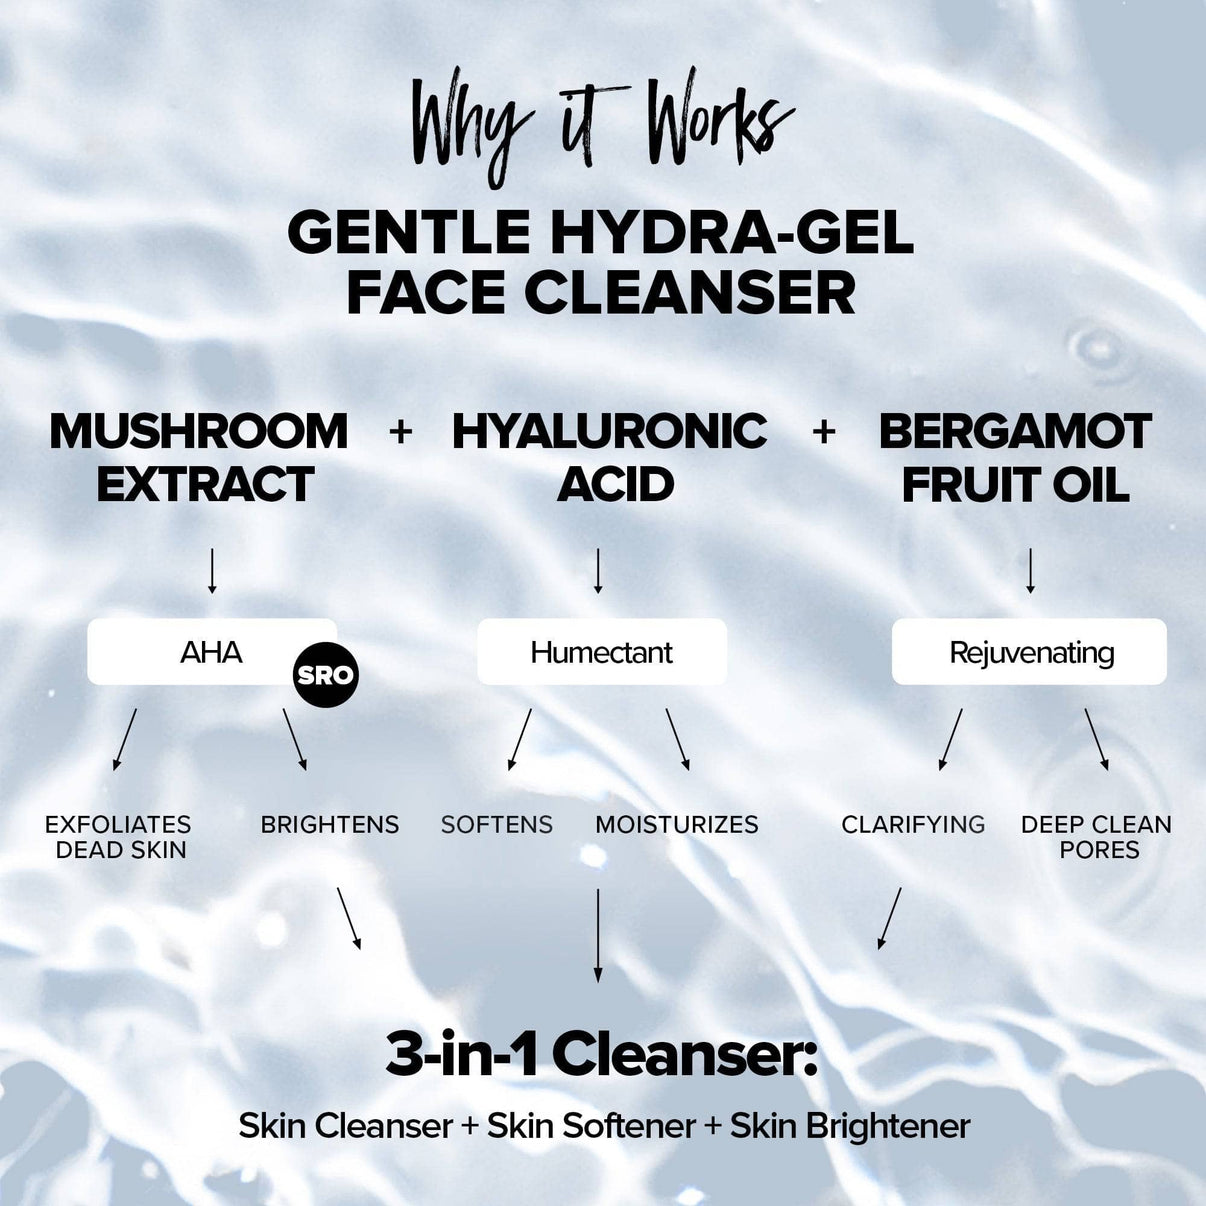 Why it works description of gentle hydra-gel cleanser from Nude Basics Kit - 10